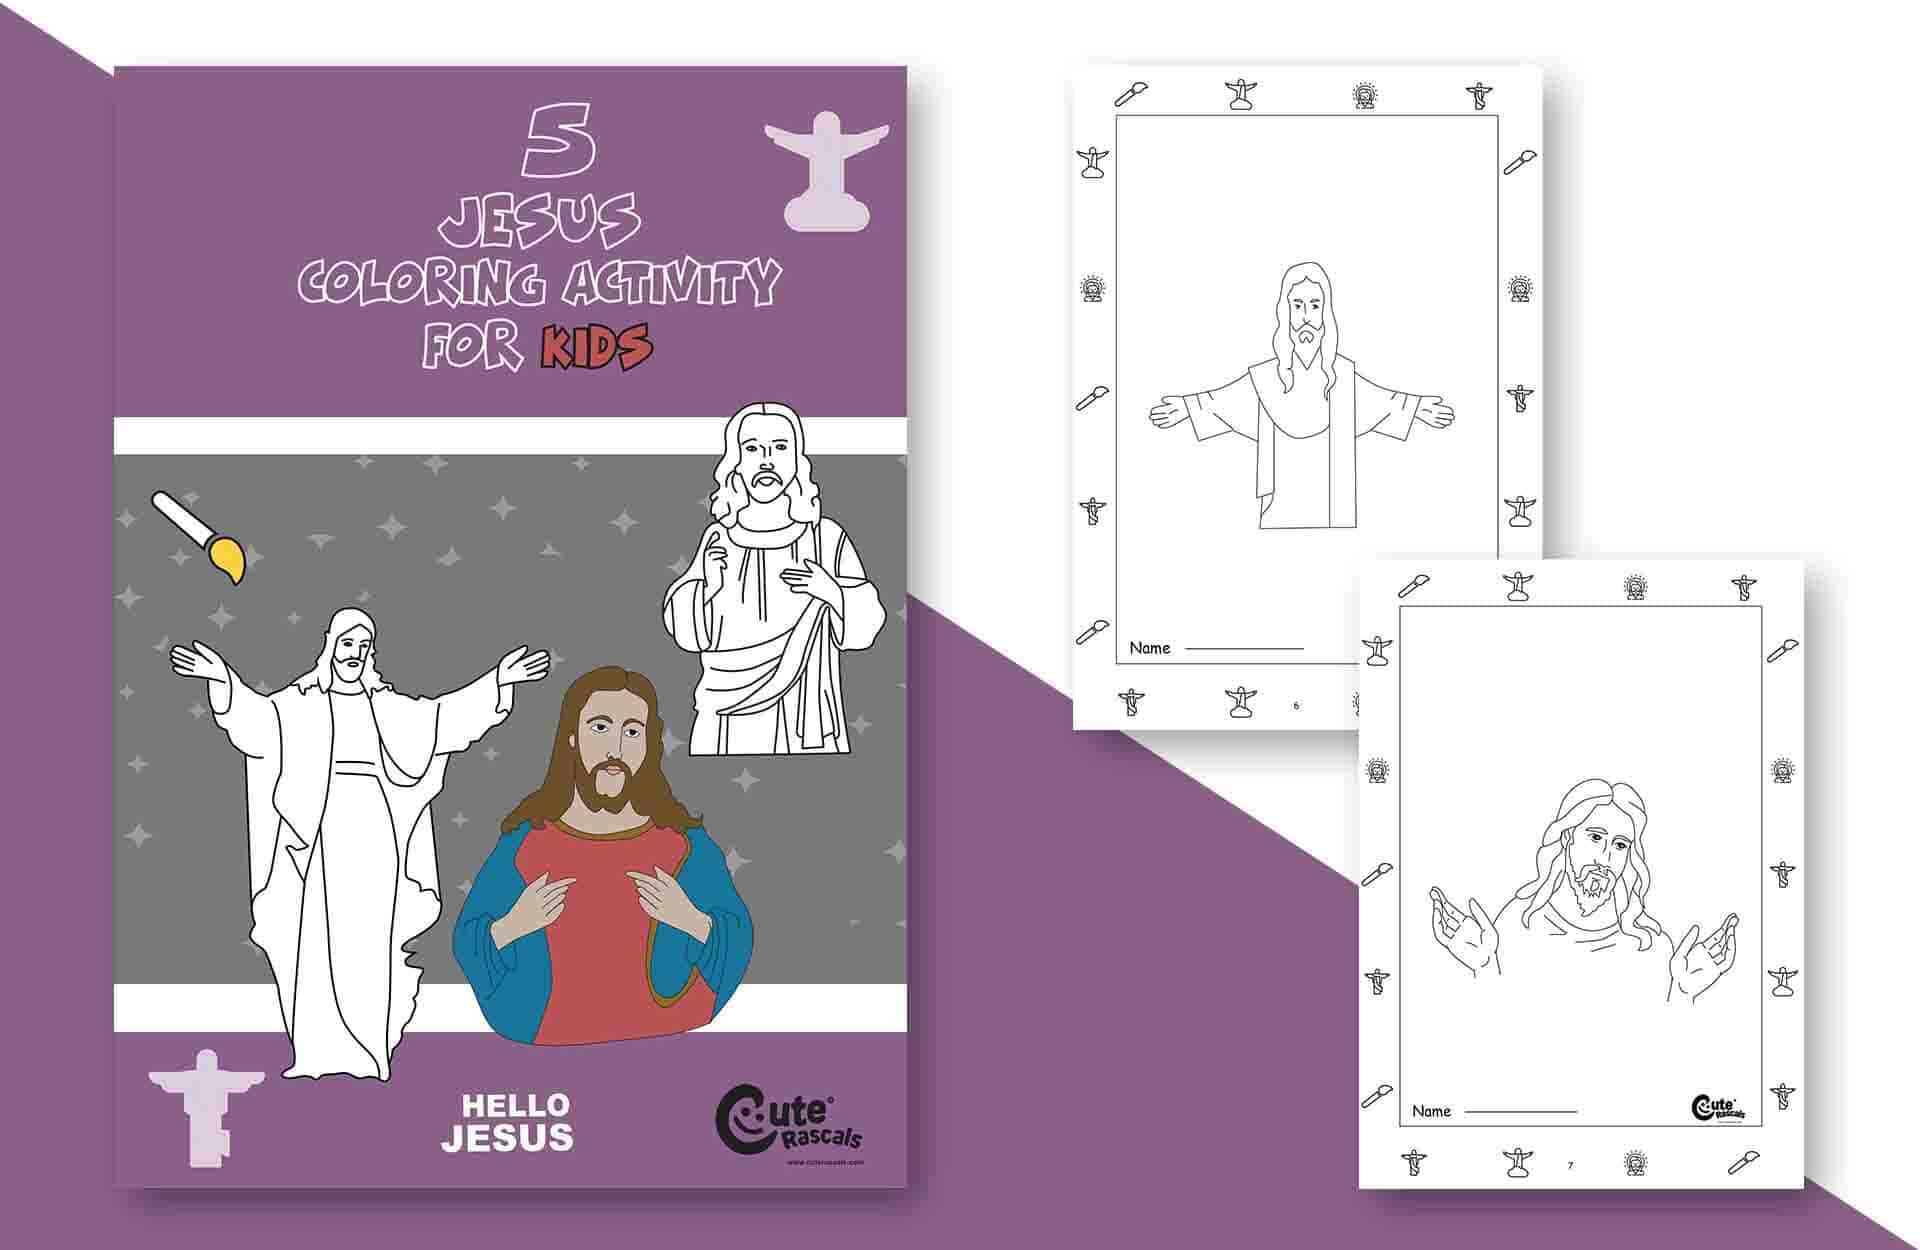 5 Jesus Coloring Pages for Kids to Strengthen Their Faith